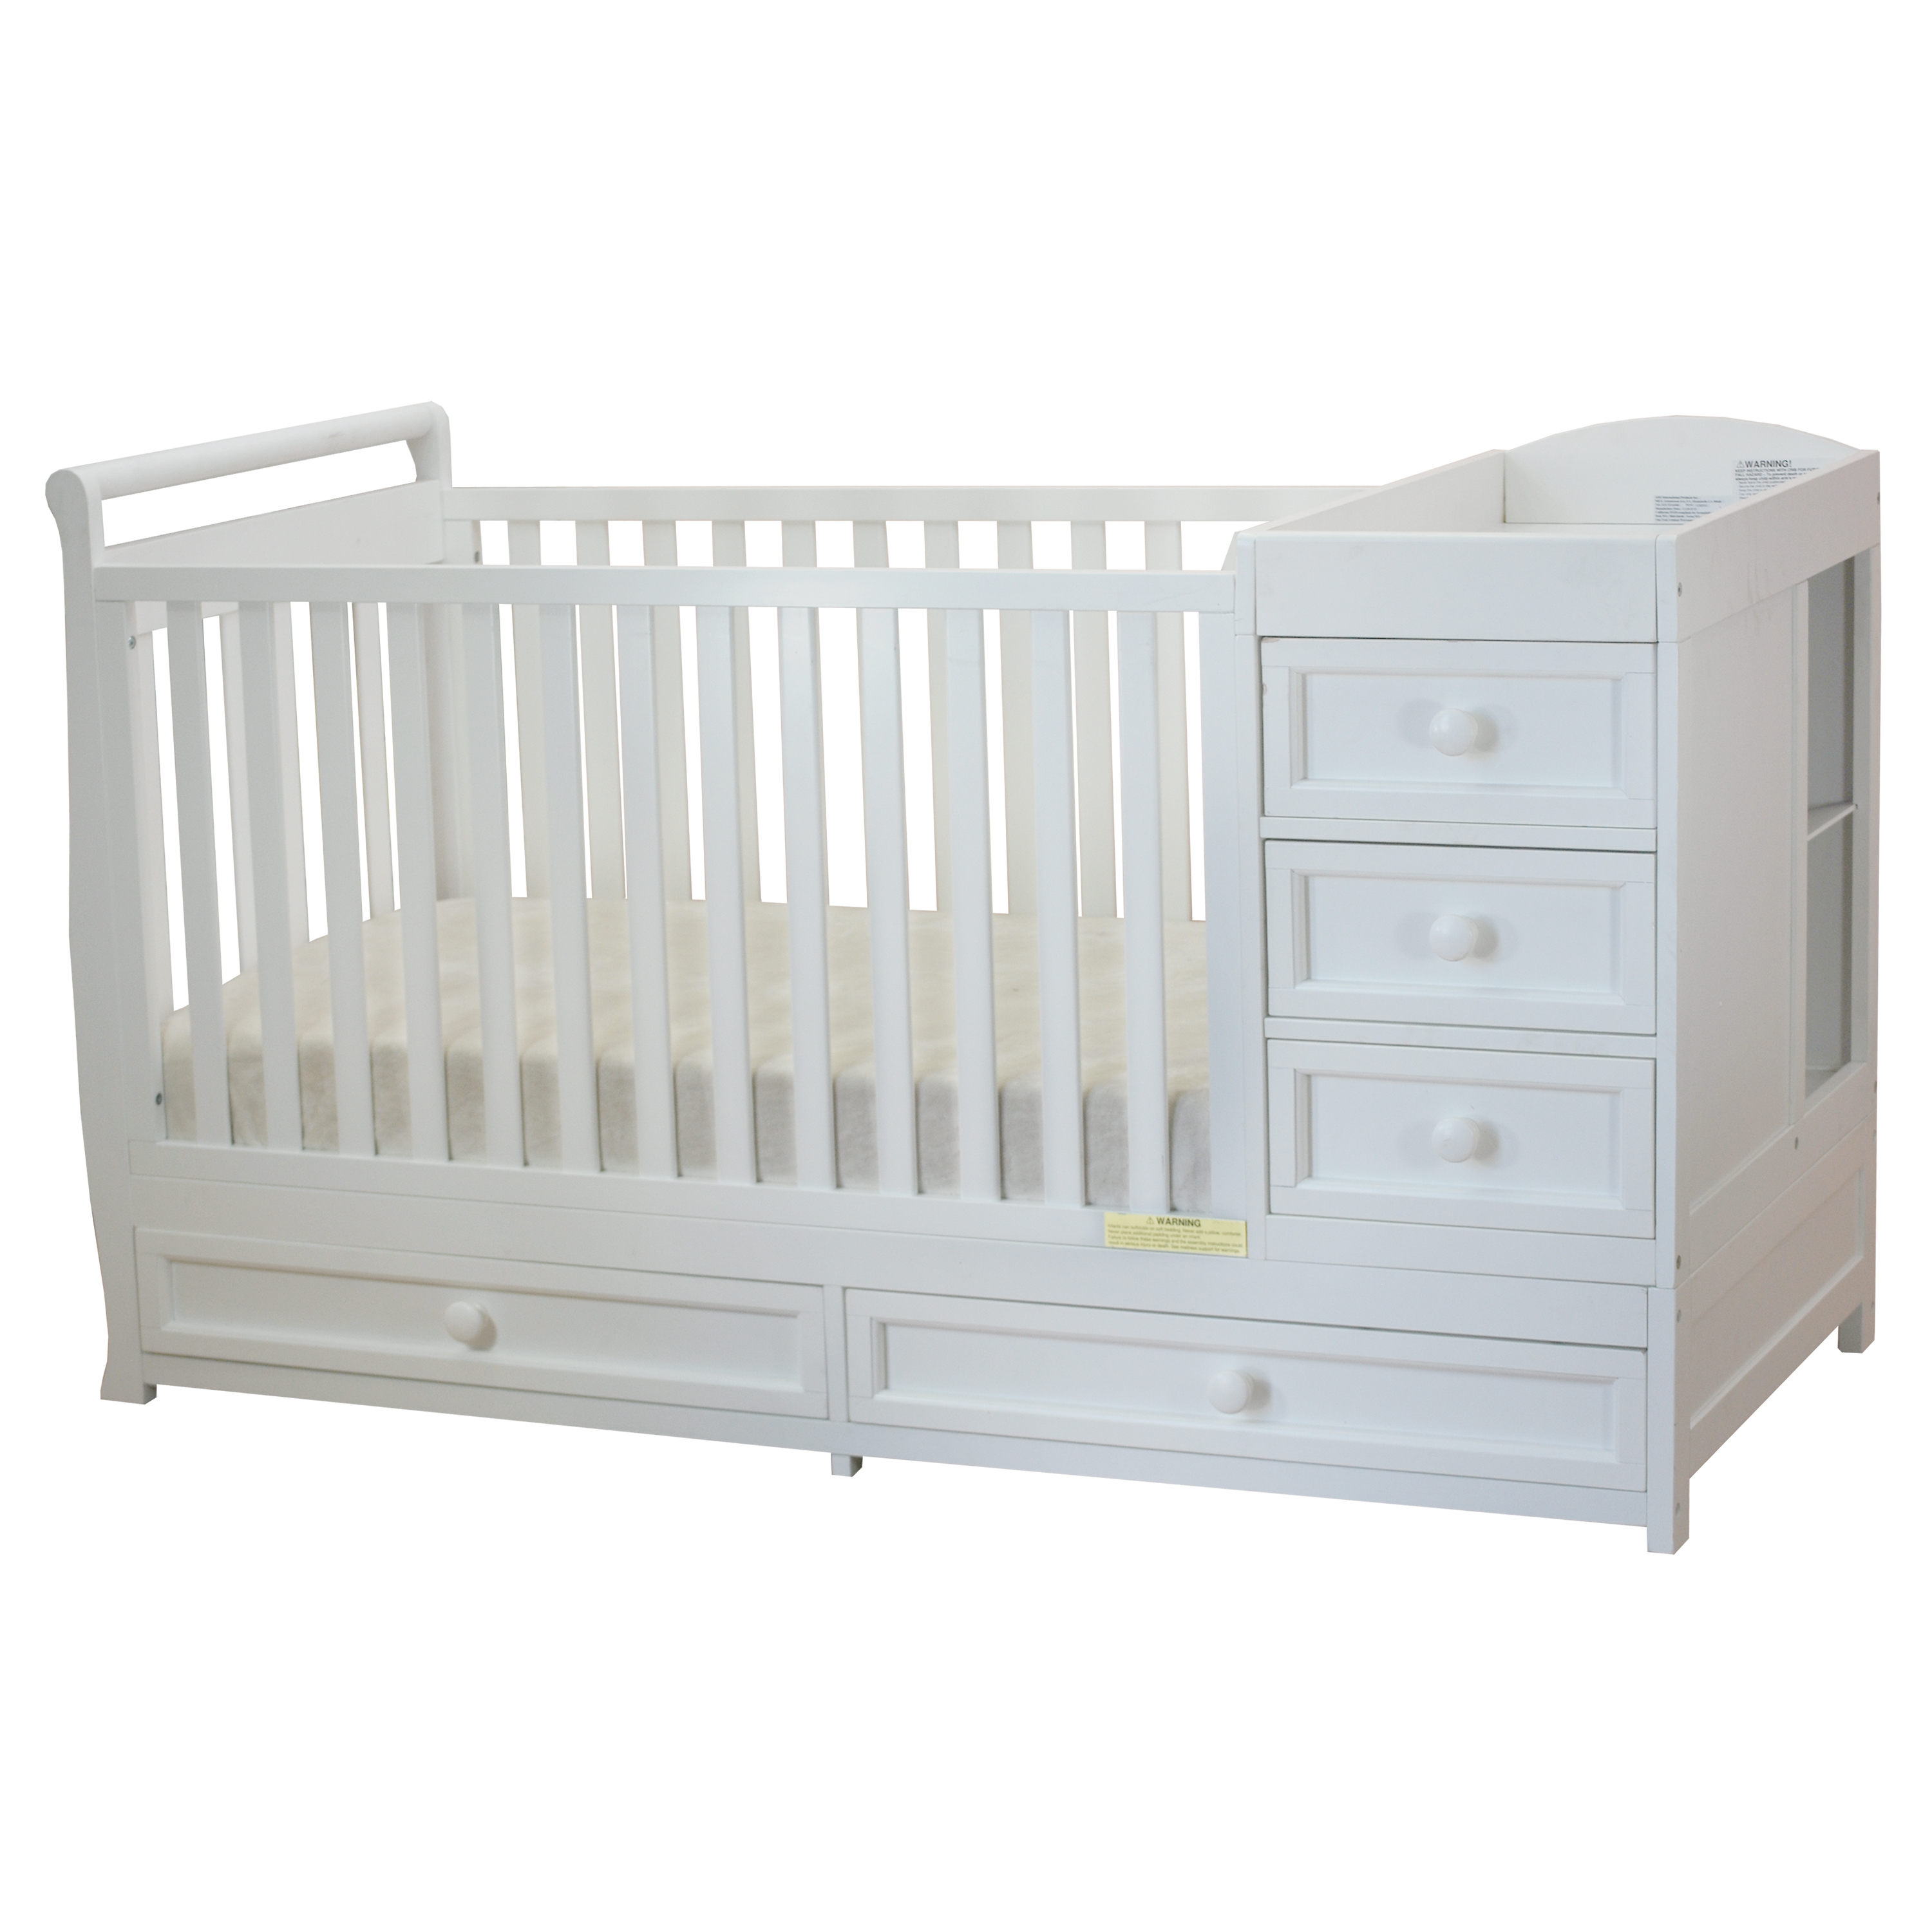 AFG Baby Furniture Daphne 2-in-1 Convertible Crib and Changer White - image 1 of 6